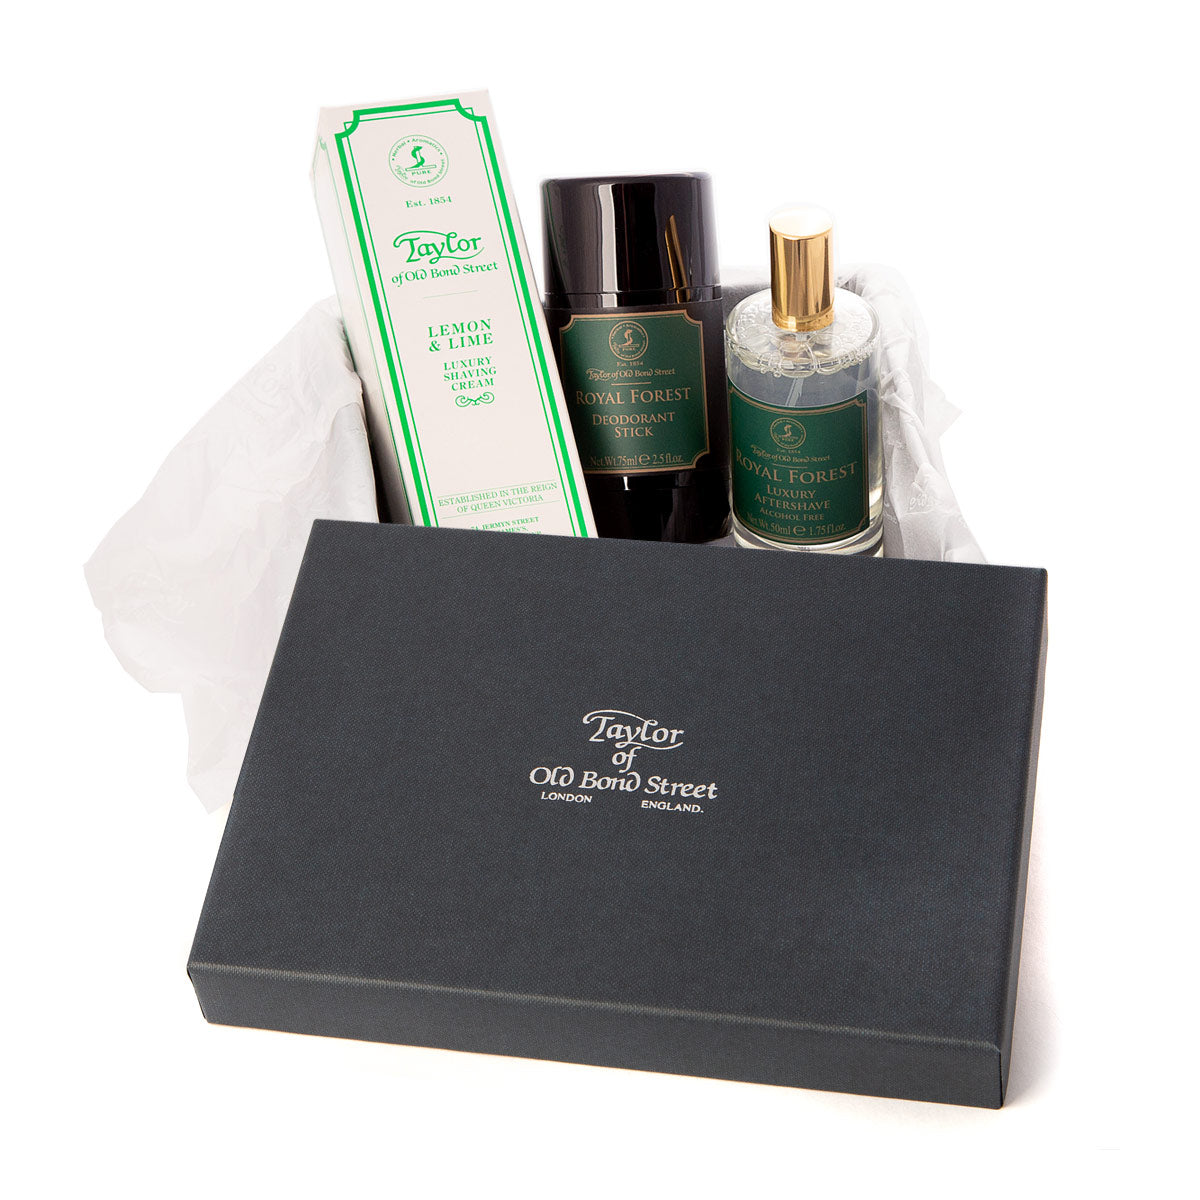 Toiletries and Fragrance Gift Set